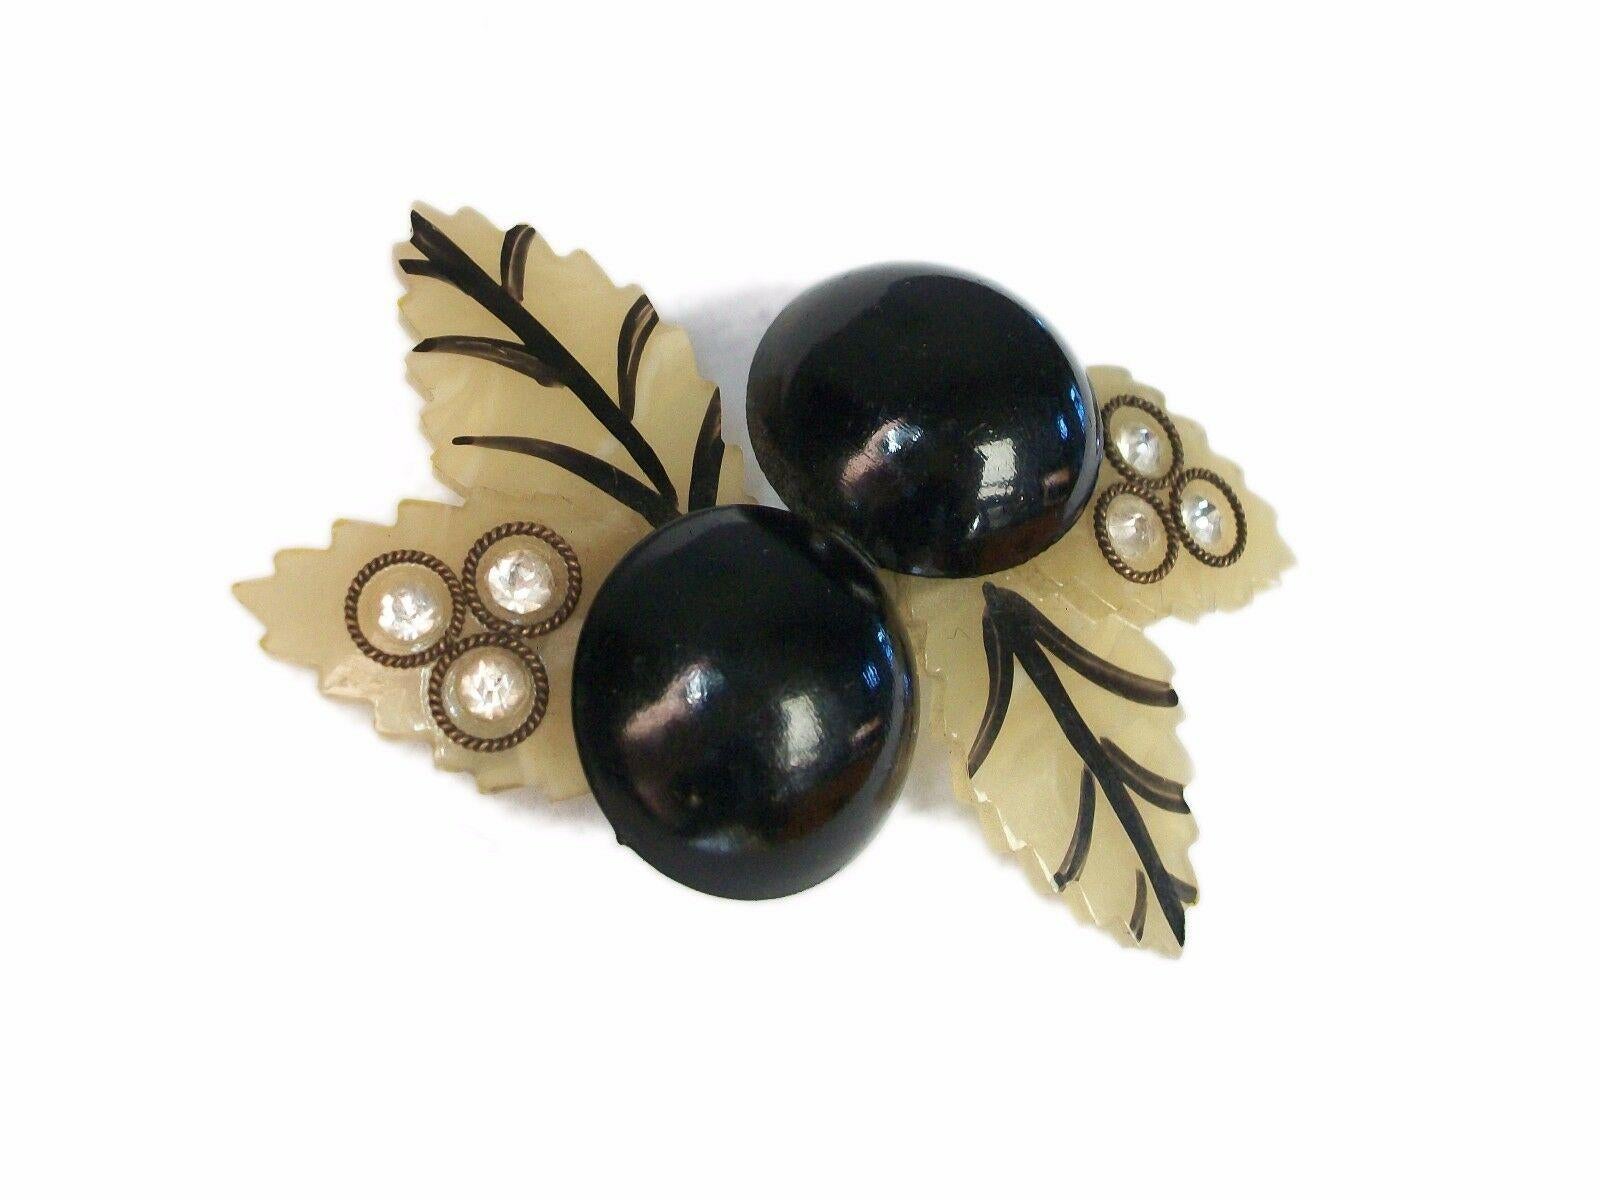 Art Deco celluloid 'black cherry' brooch/pin - two leaves with painted veins - the other two leaves set with rhinestones and twisted brass surrounds - original 'c' catch and long pin with round hinge - unsigned - United States (likely) - circa